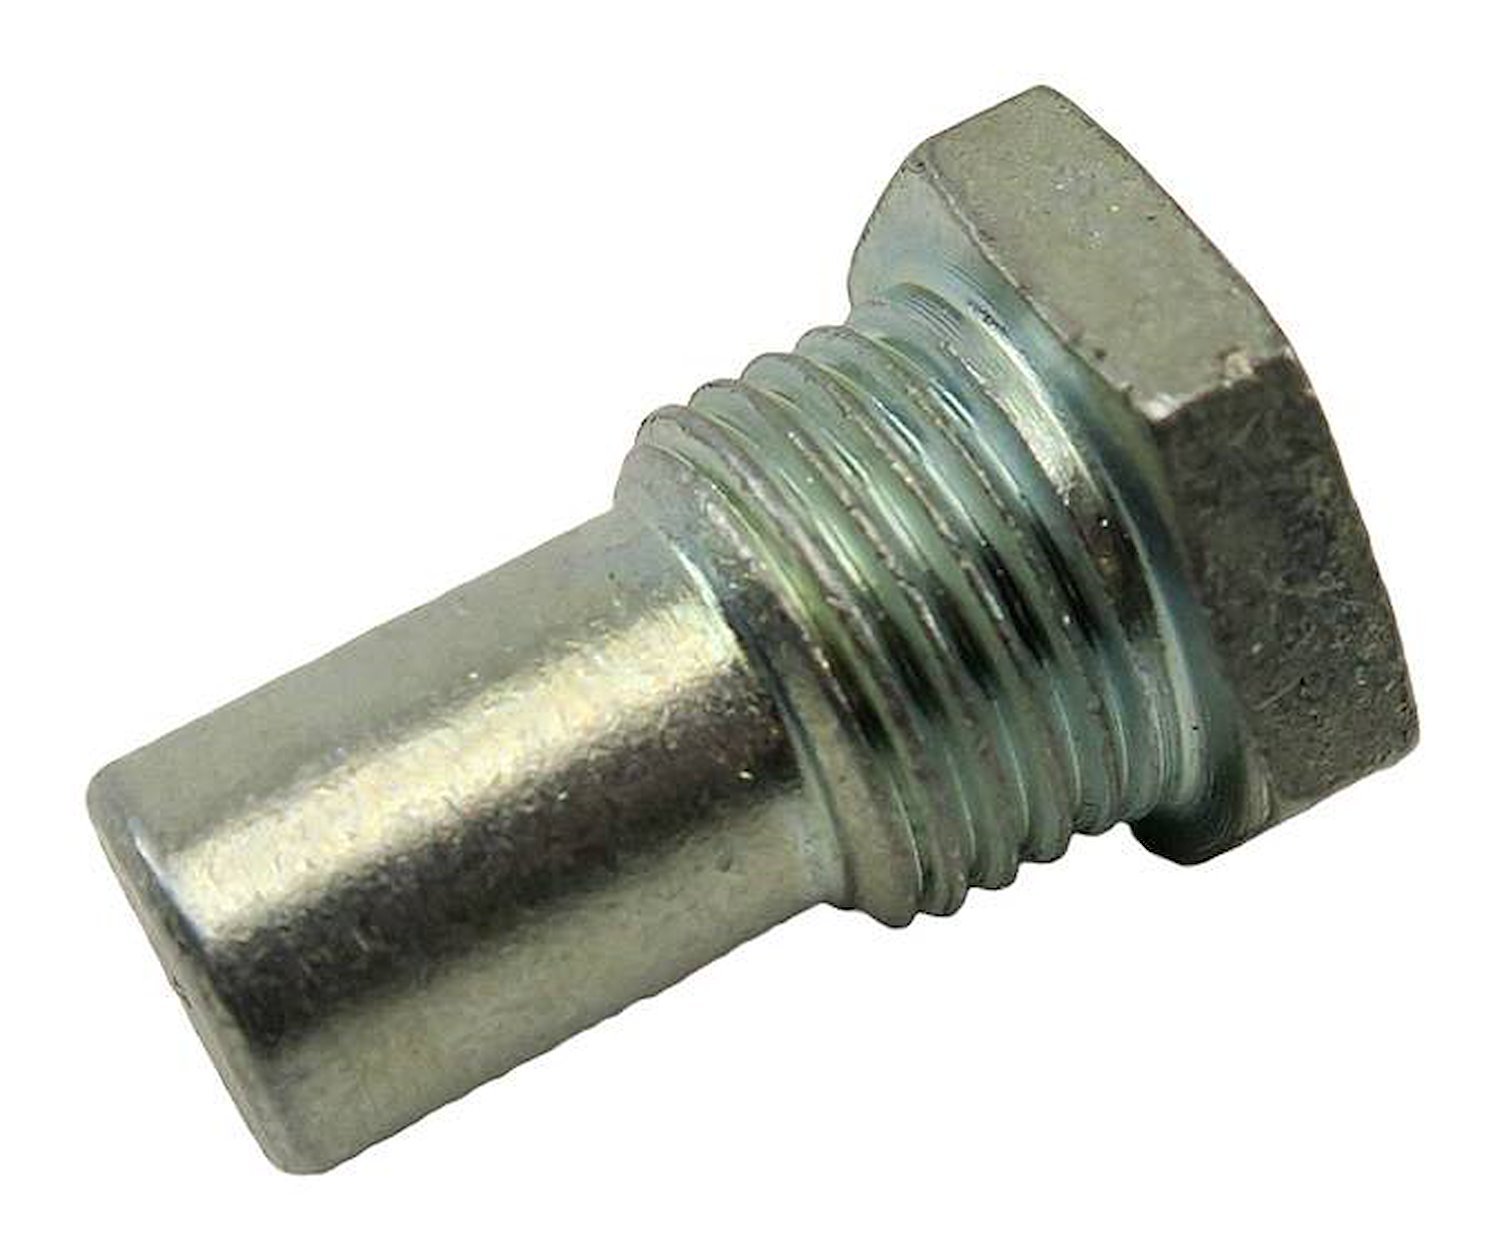 CMB001 1962-1968 Chevrolet Full-Size Convertible Top Cylinder Mounting Bolt